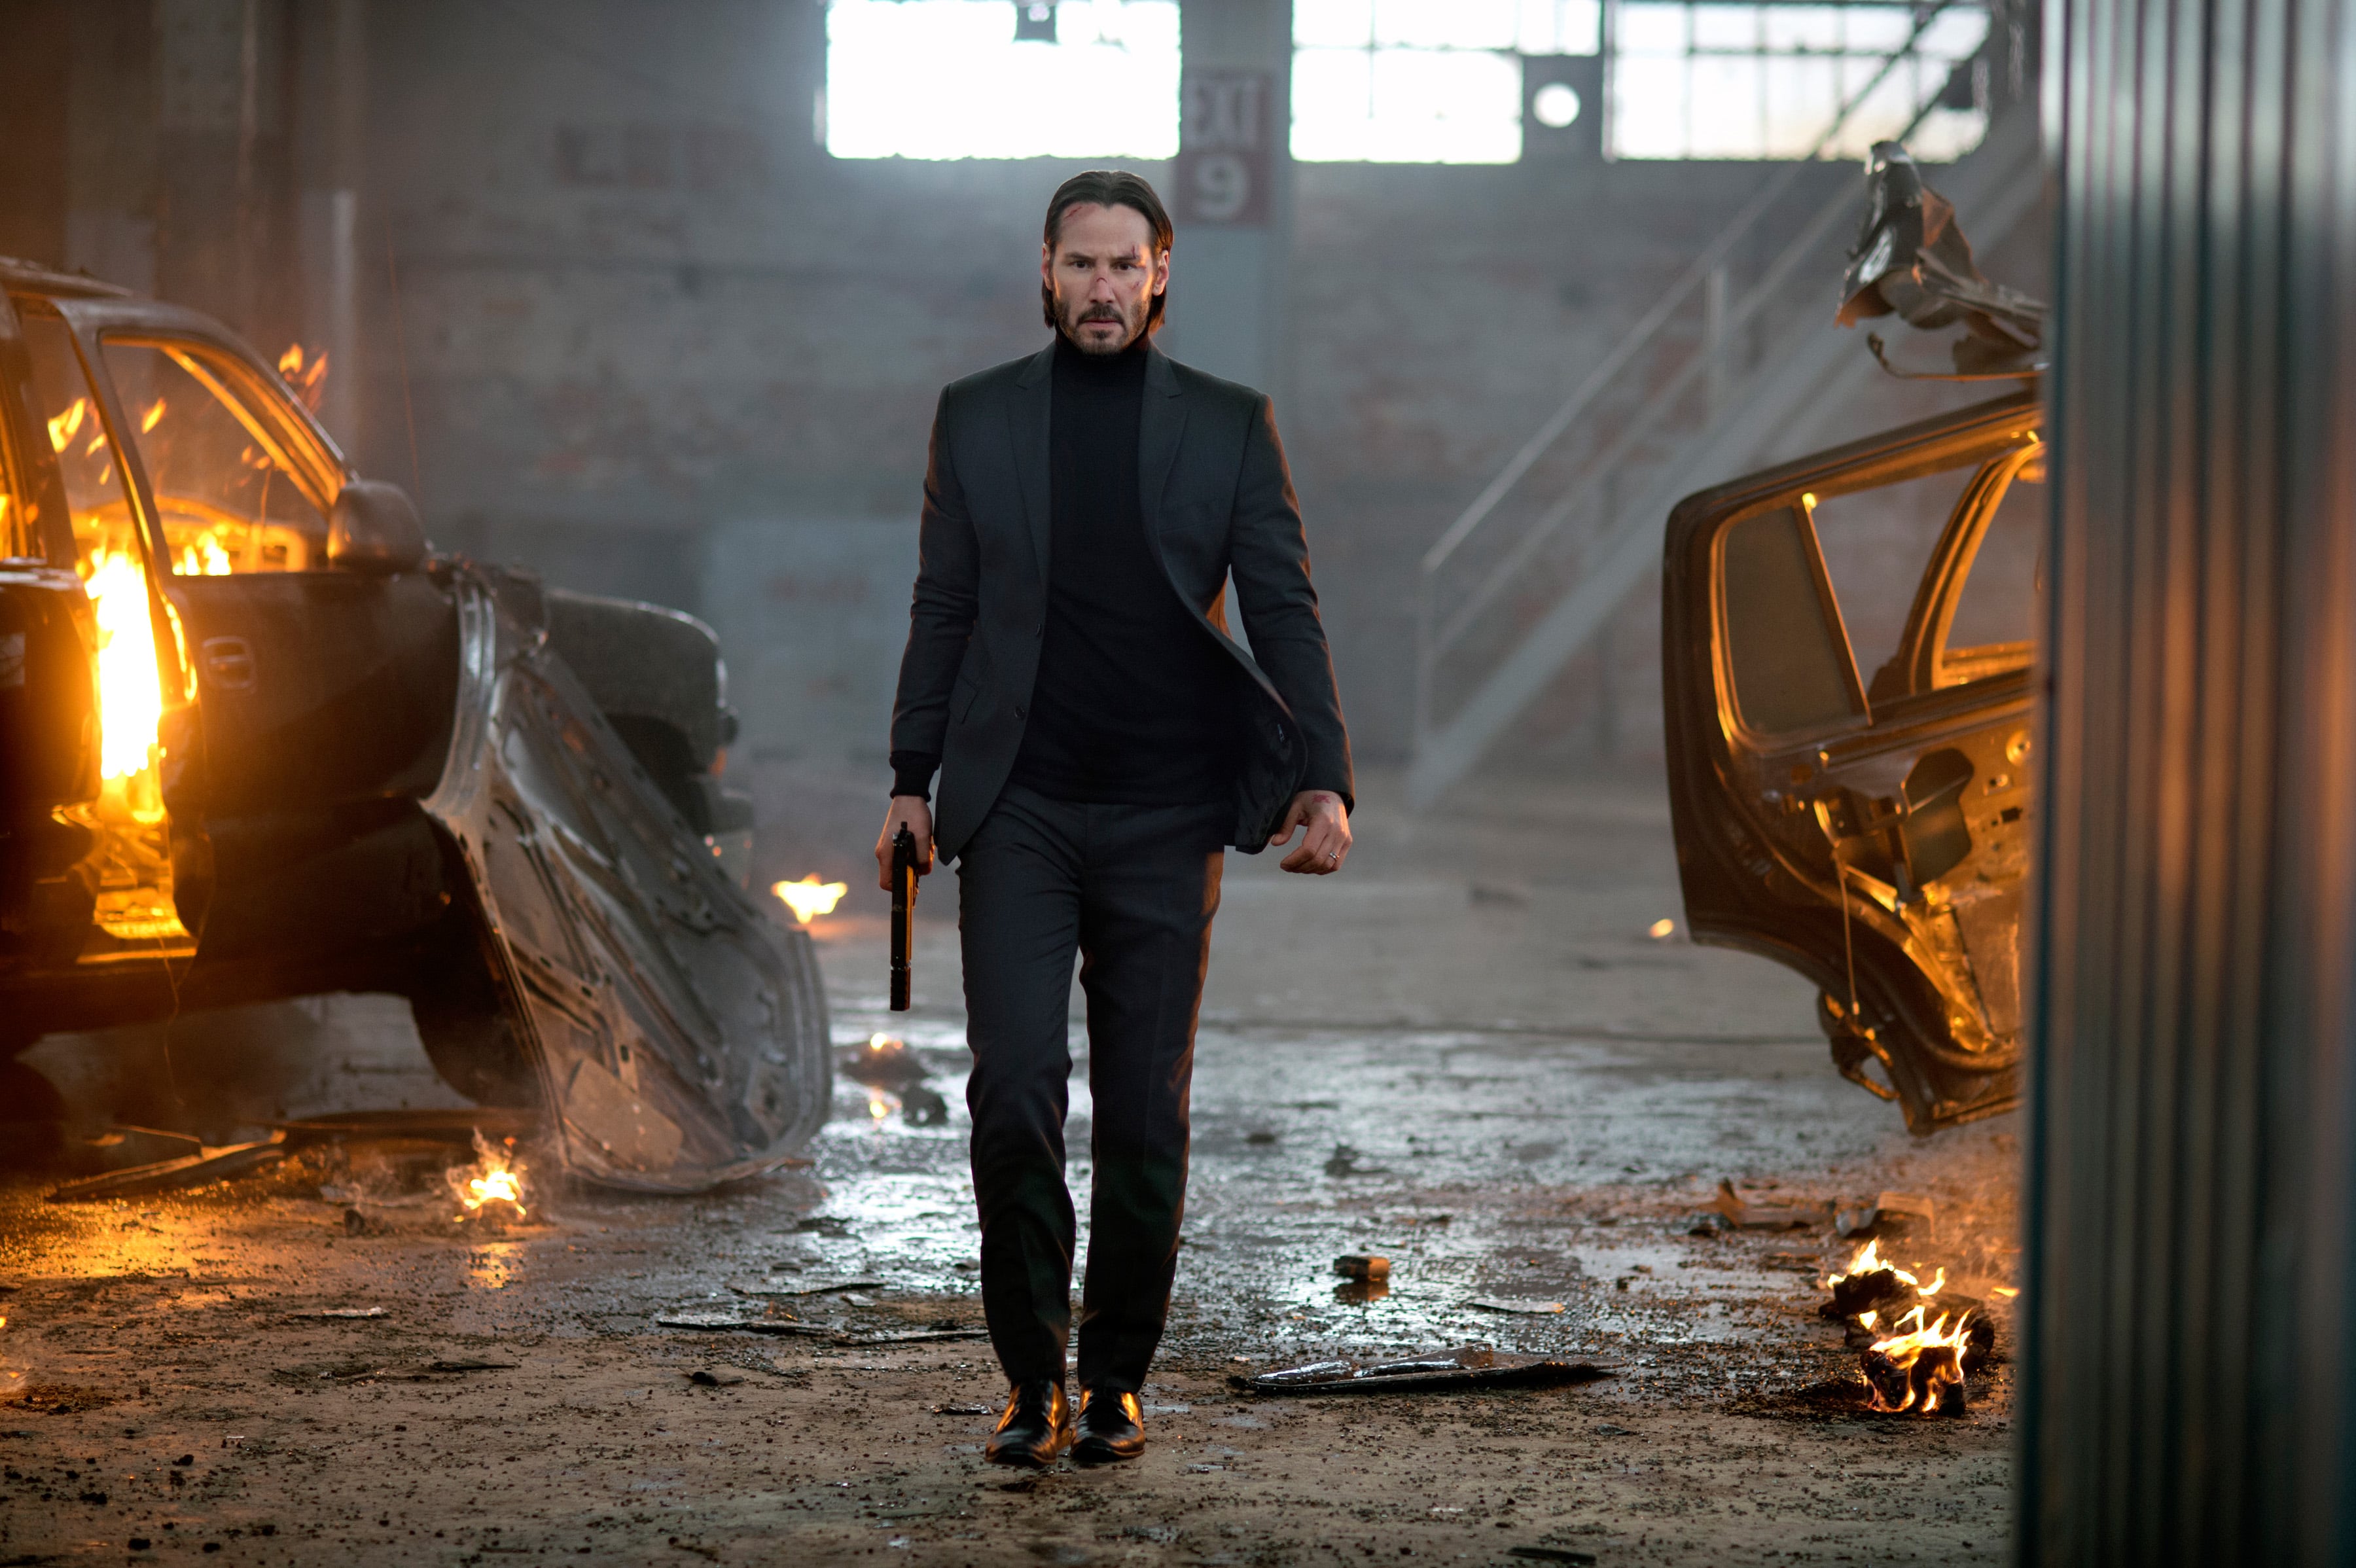 Love John Wick? Here's more like it in movies, TV shows, and